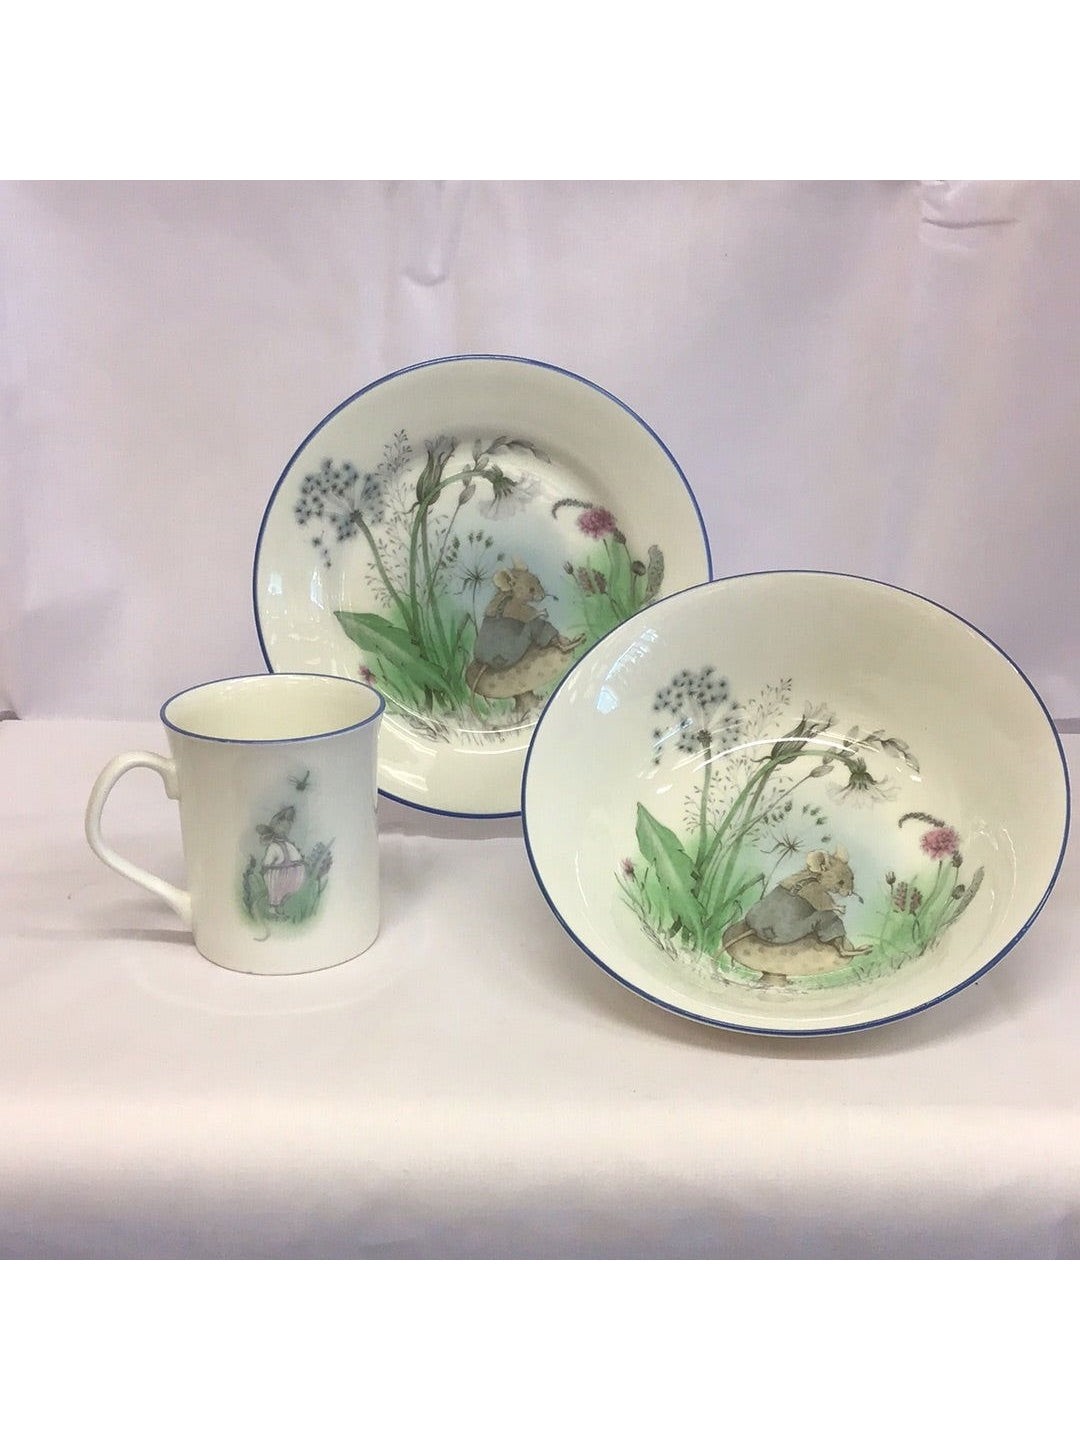 Elizabeth Mr Mouse Child’s 3pc Dinner Set - The Kennedy Collective Thrift - 